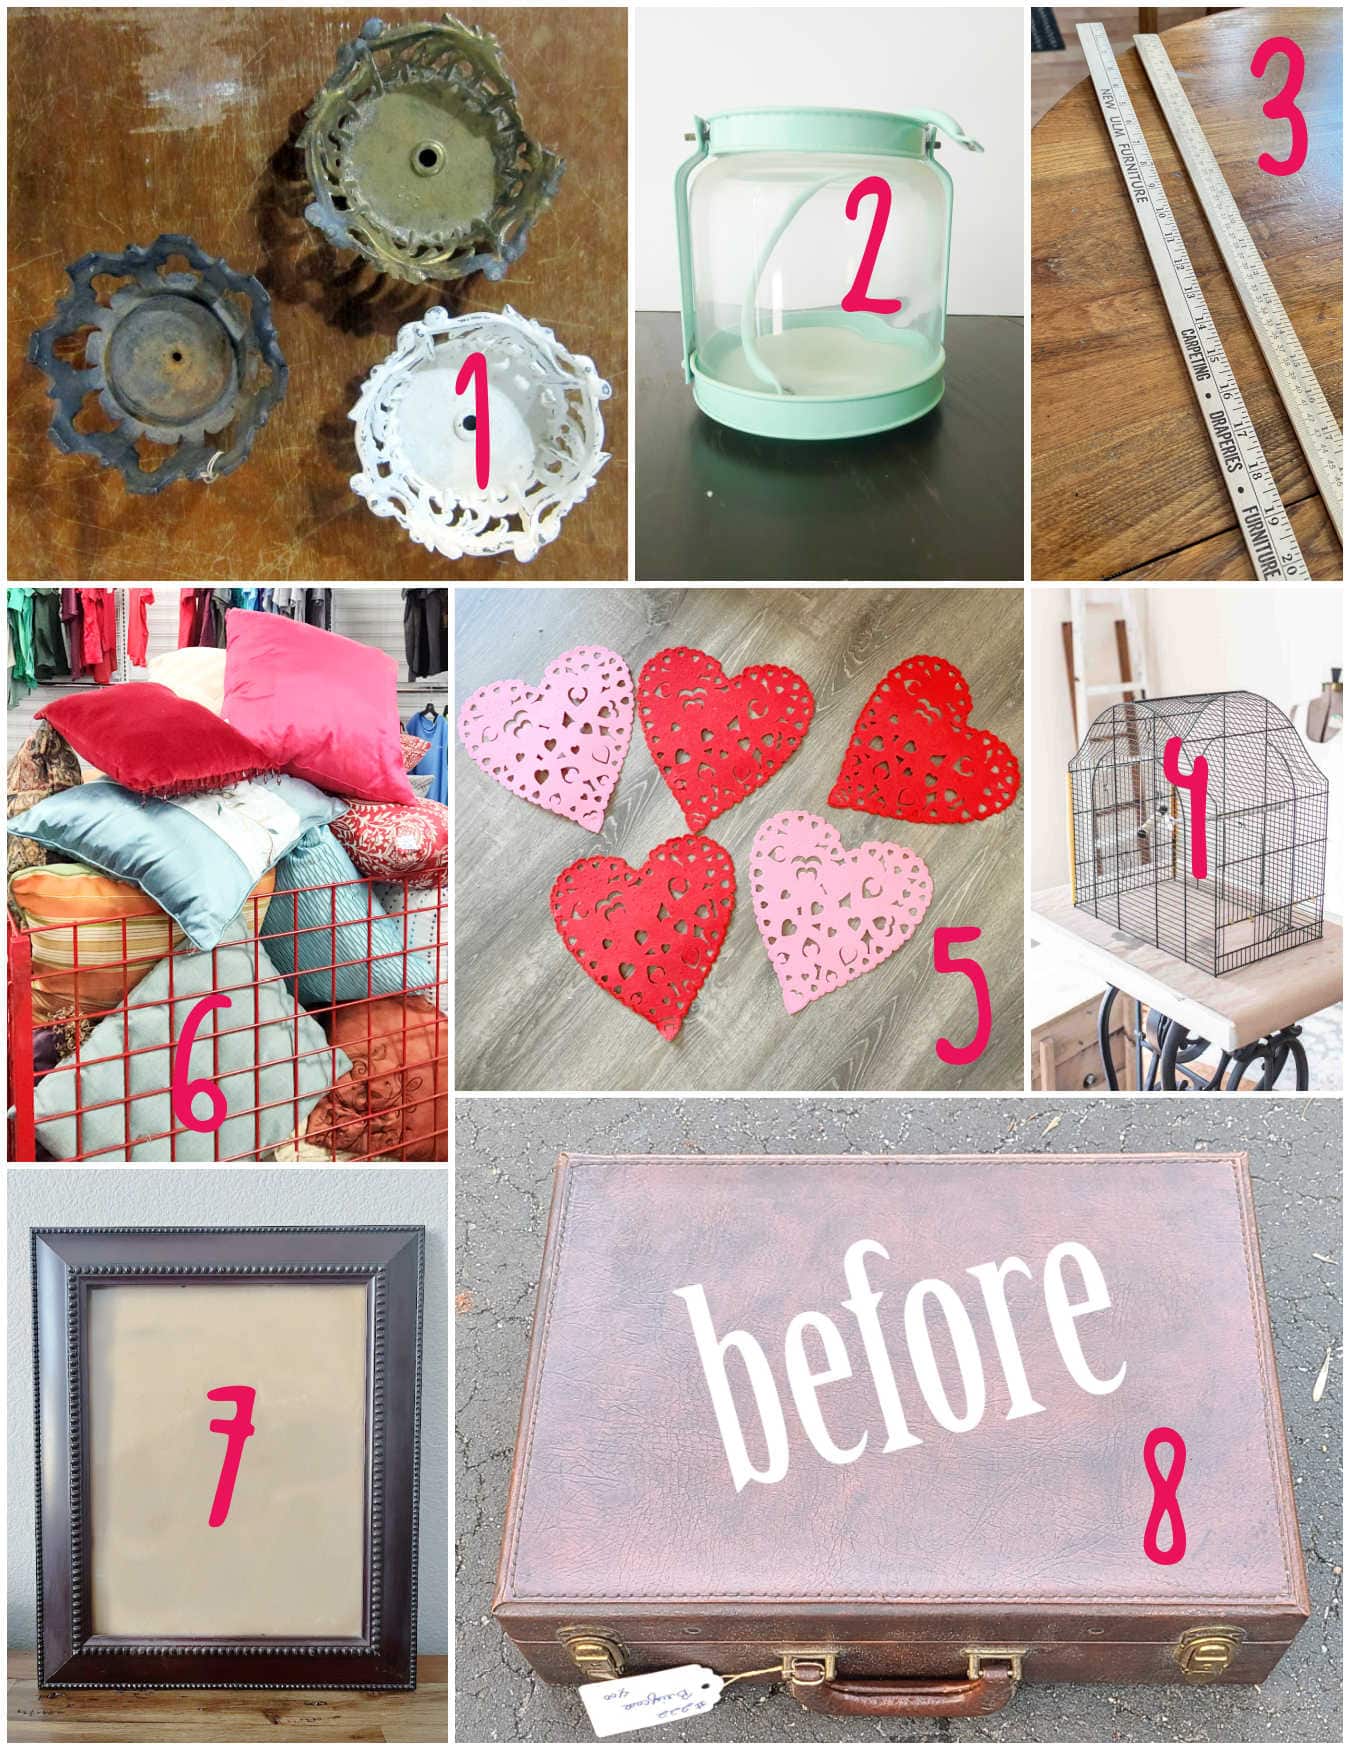 upcycled crafts and project ideas